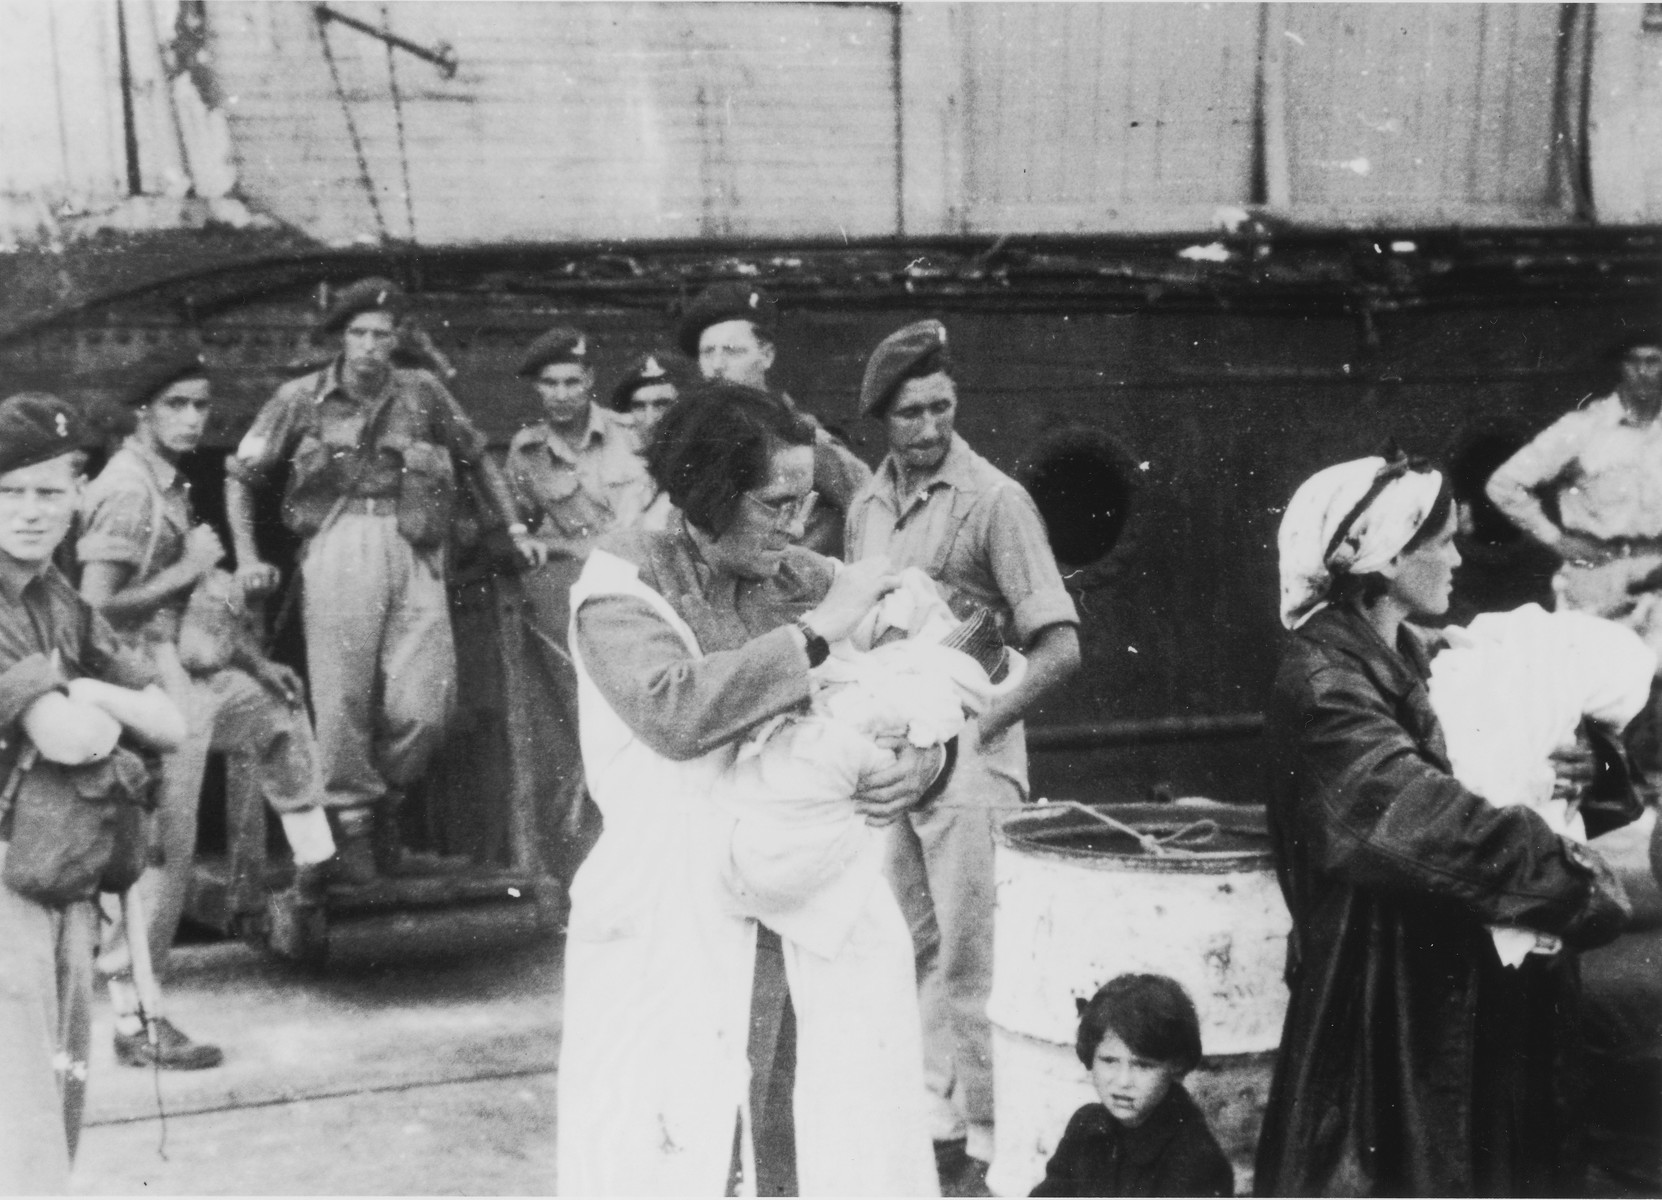 Two female passengers of the Exodus 1947 wait on the dock in Haifa holding infants who were born during the voyage.  

The woman at the left is the grandmother of the infant she holds.  The child's mother died in childbirth.